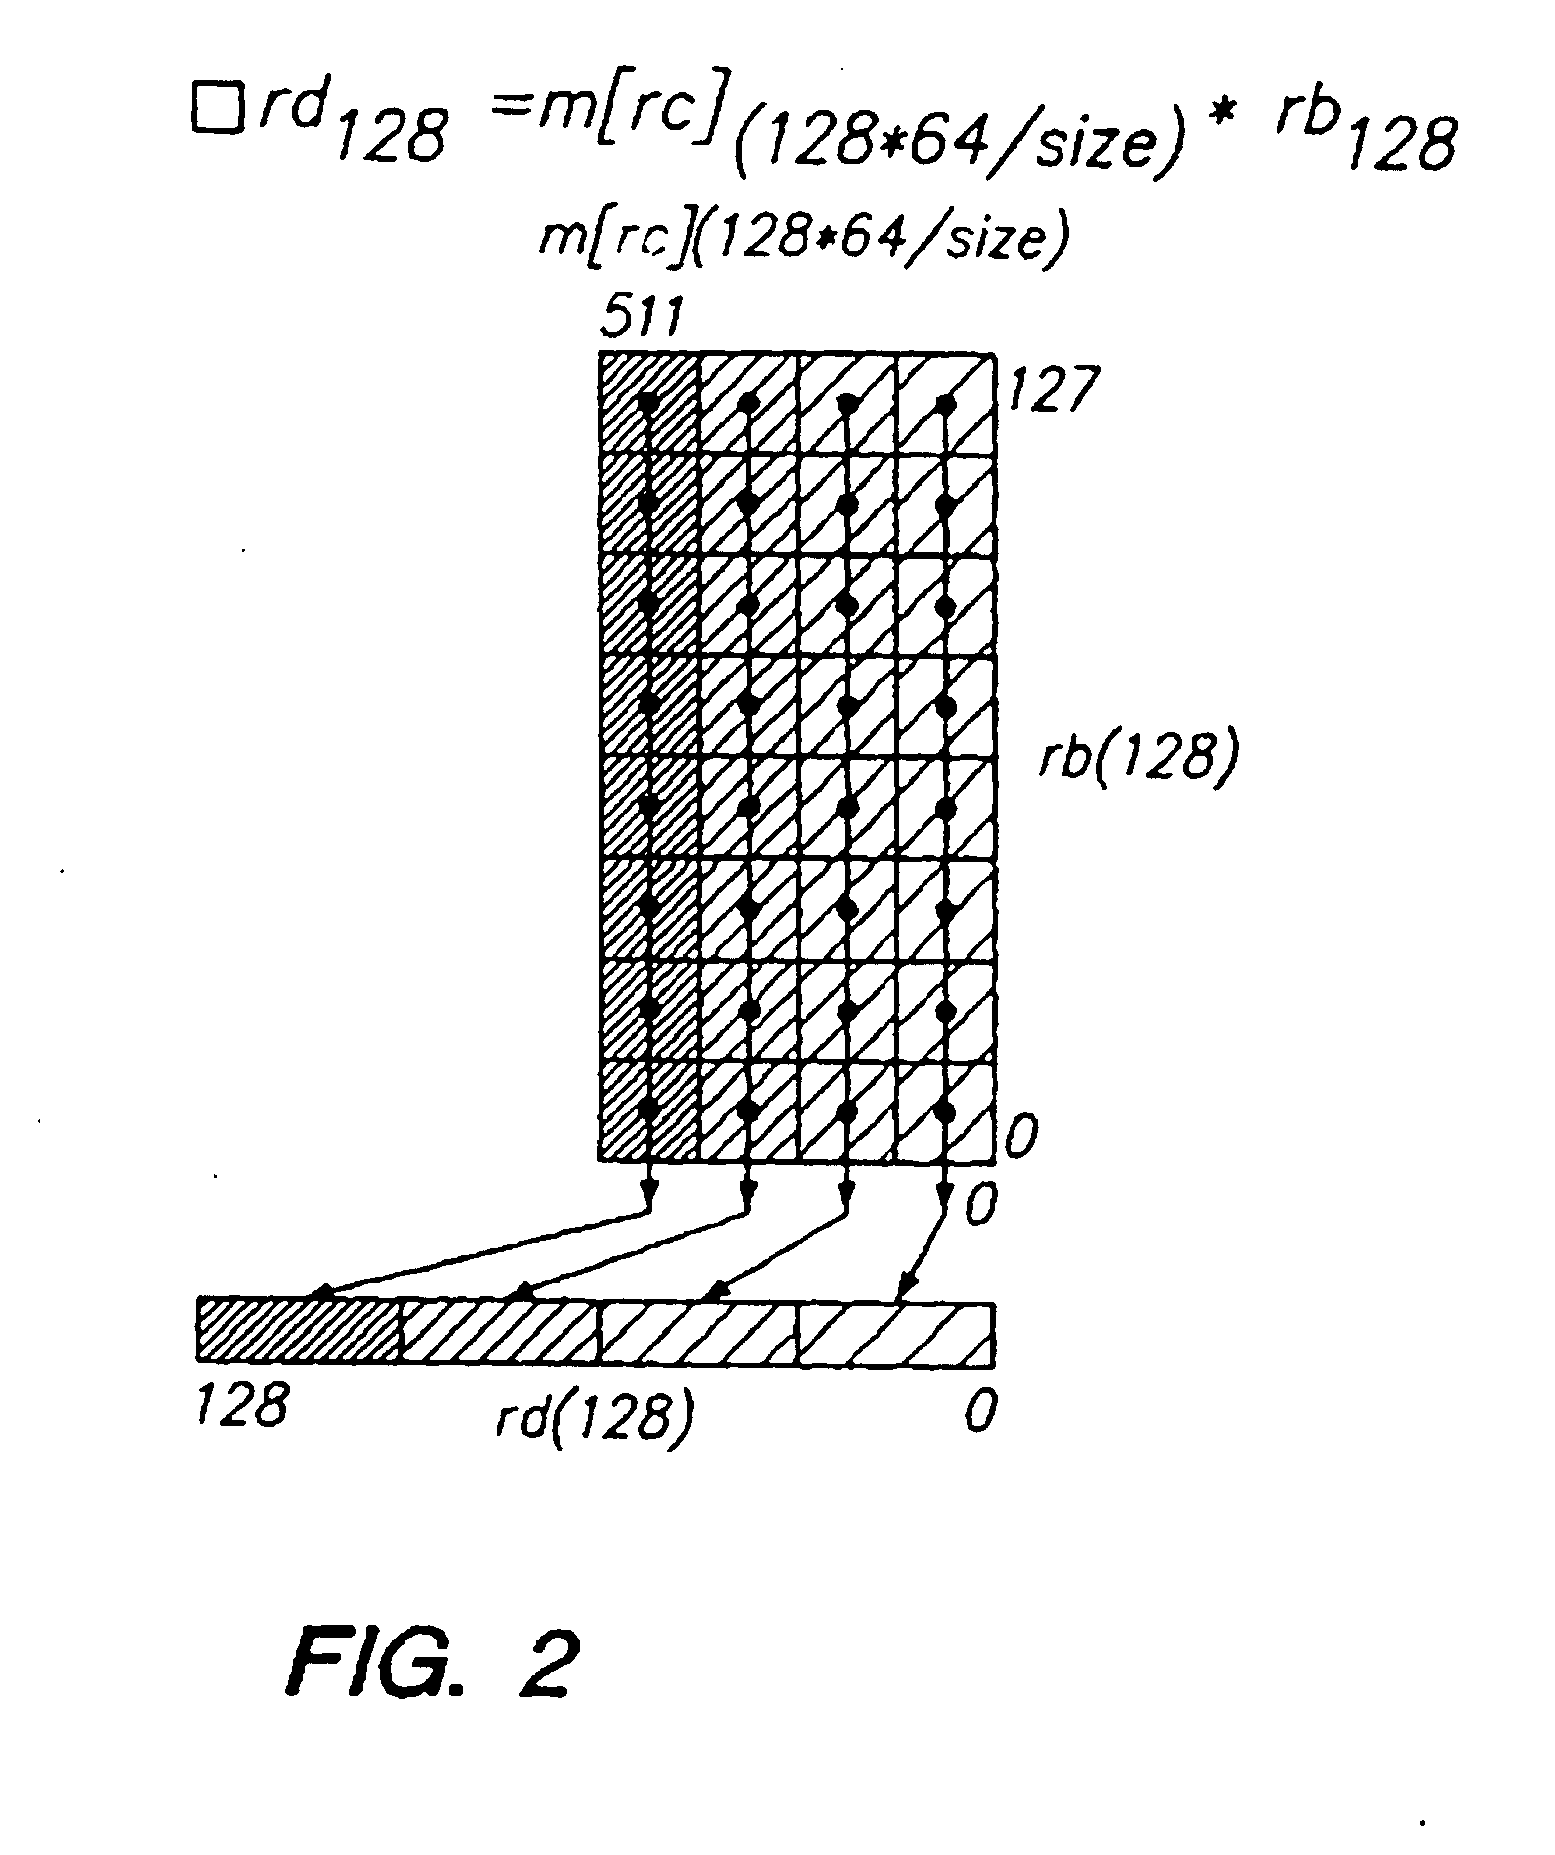 Programmable processor and method with wide operations